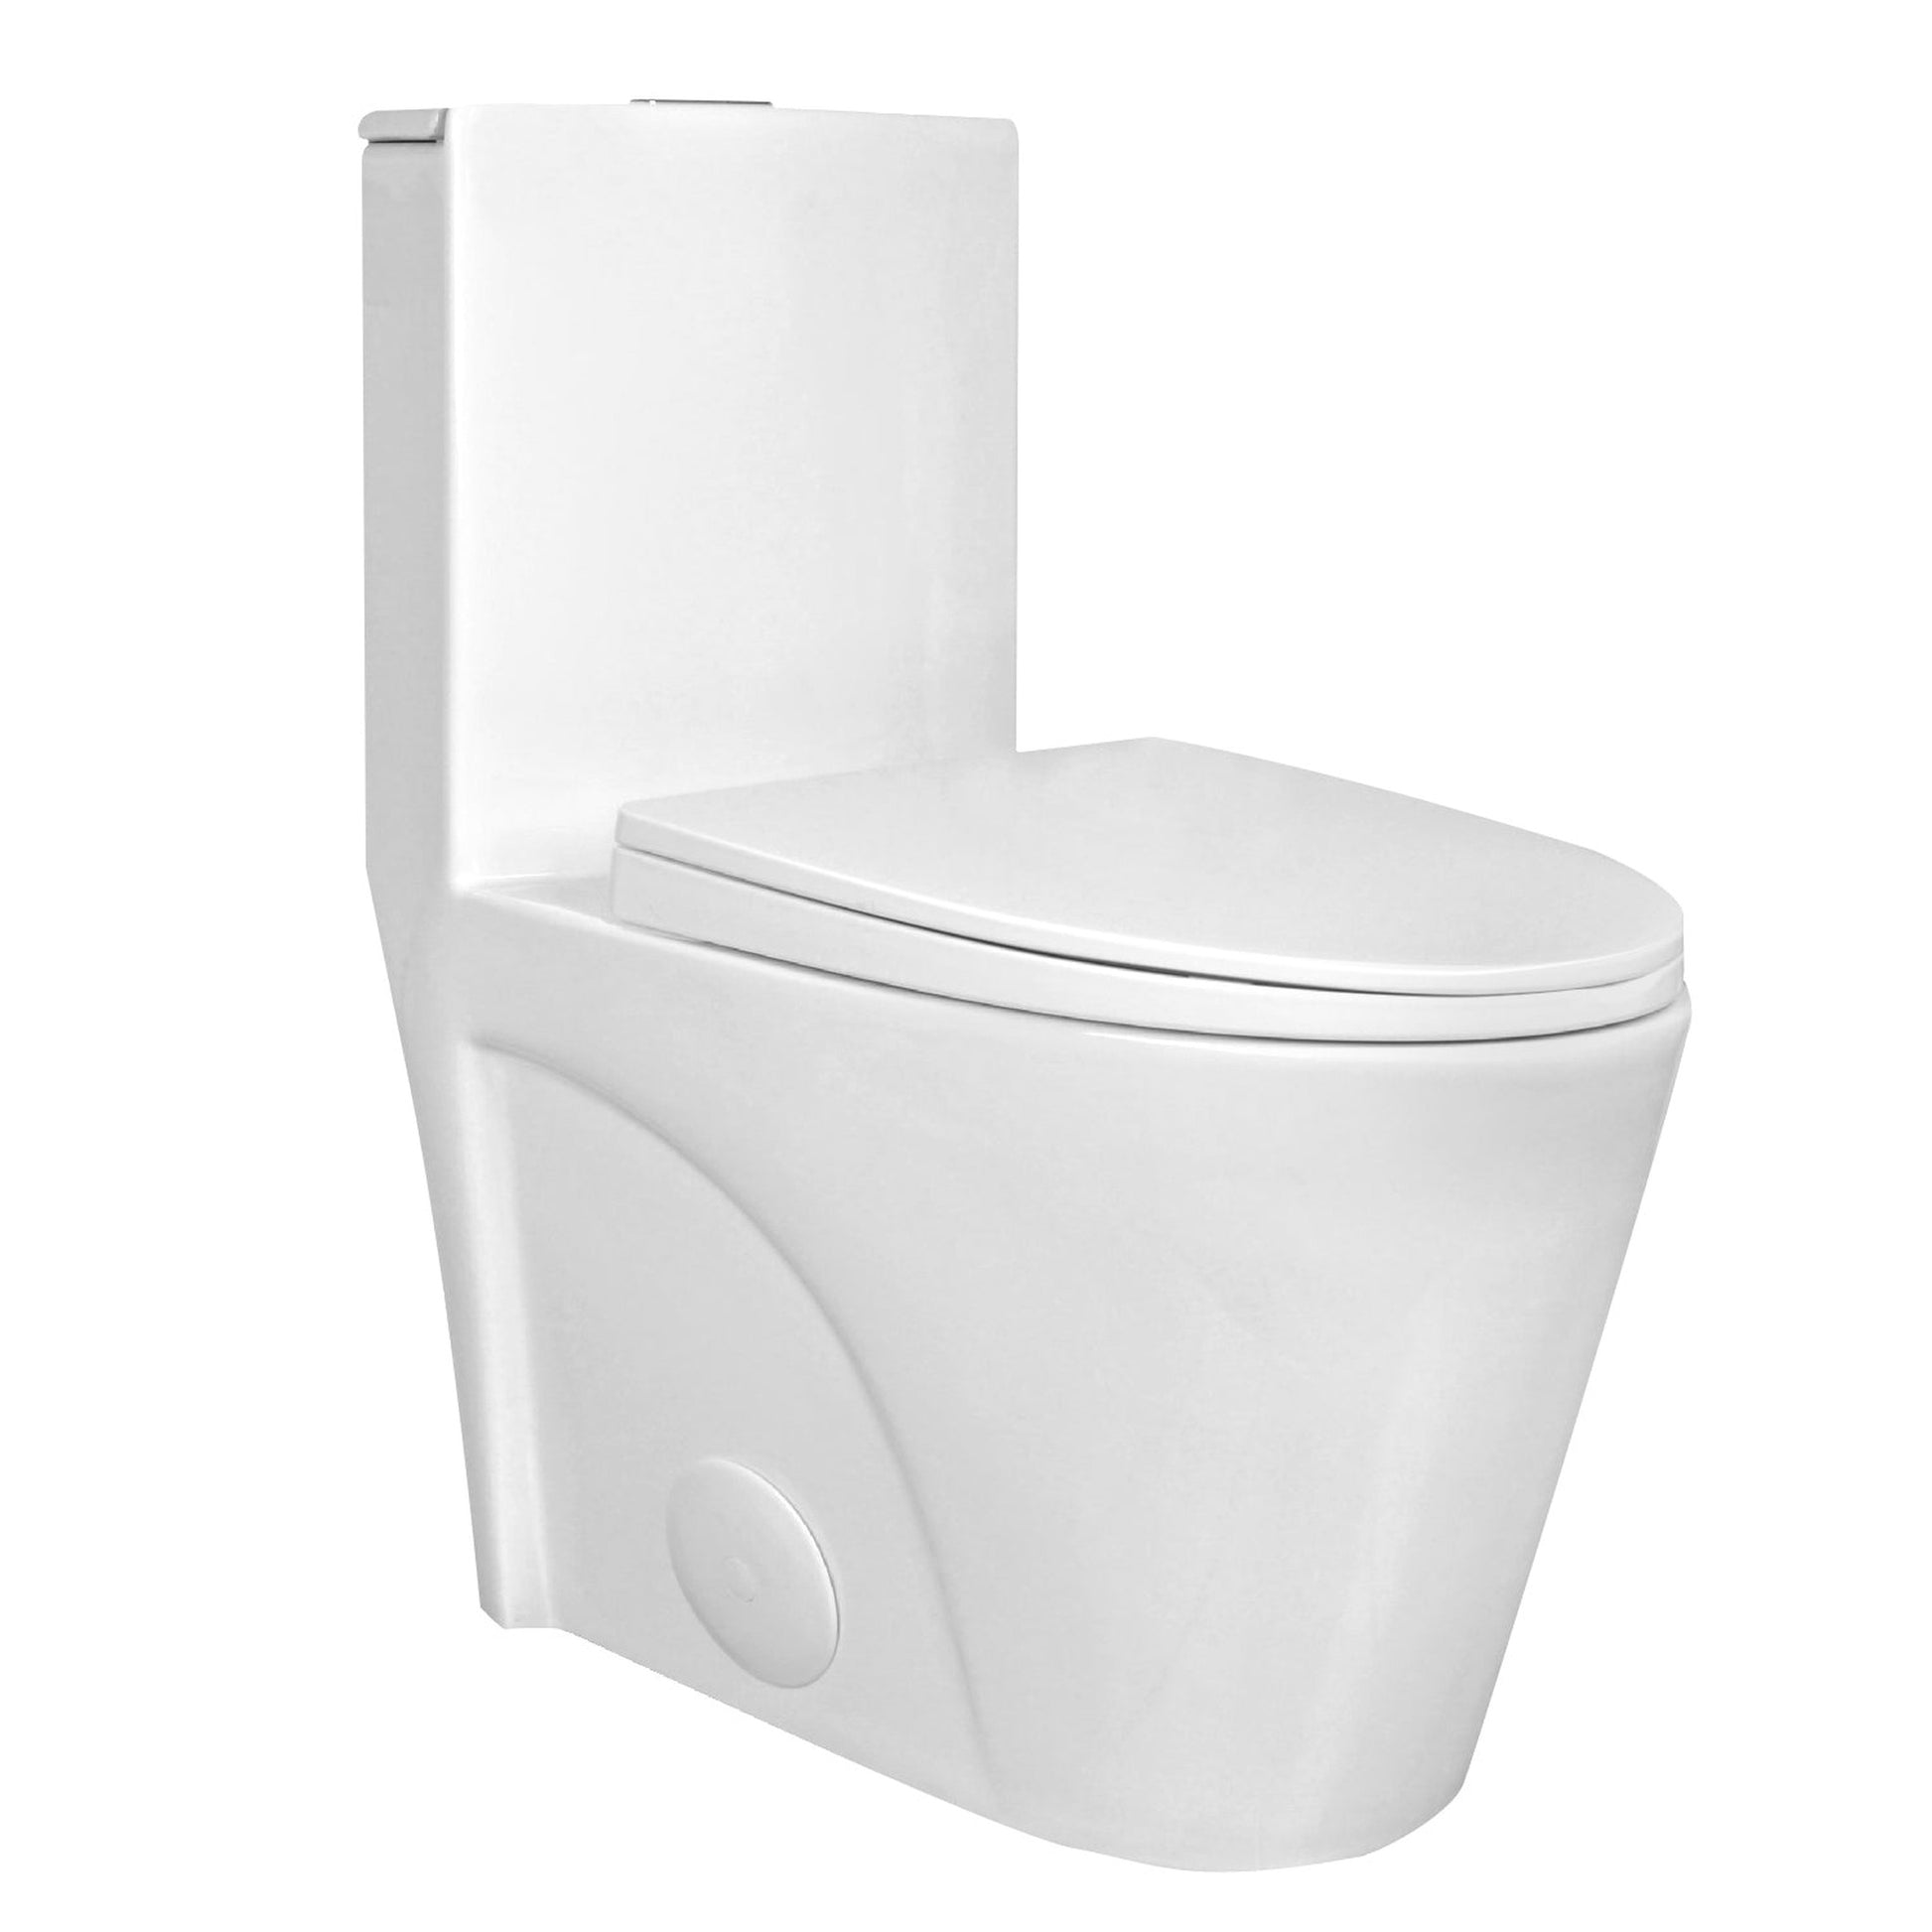 DeerValley Ace DV-1F52102 1.6 GPF Dual-Flush Elongated White One-Piece Toilet